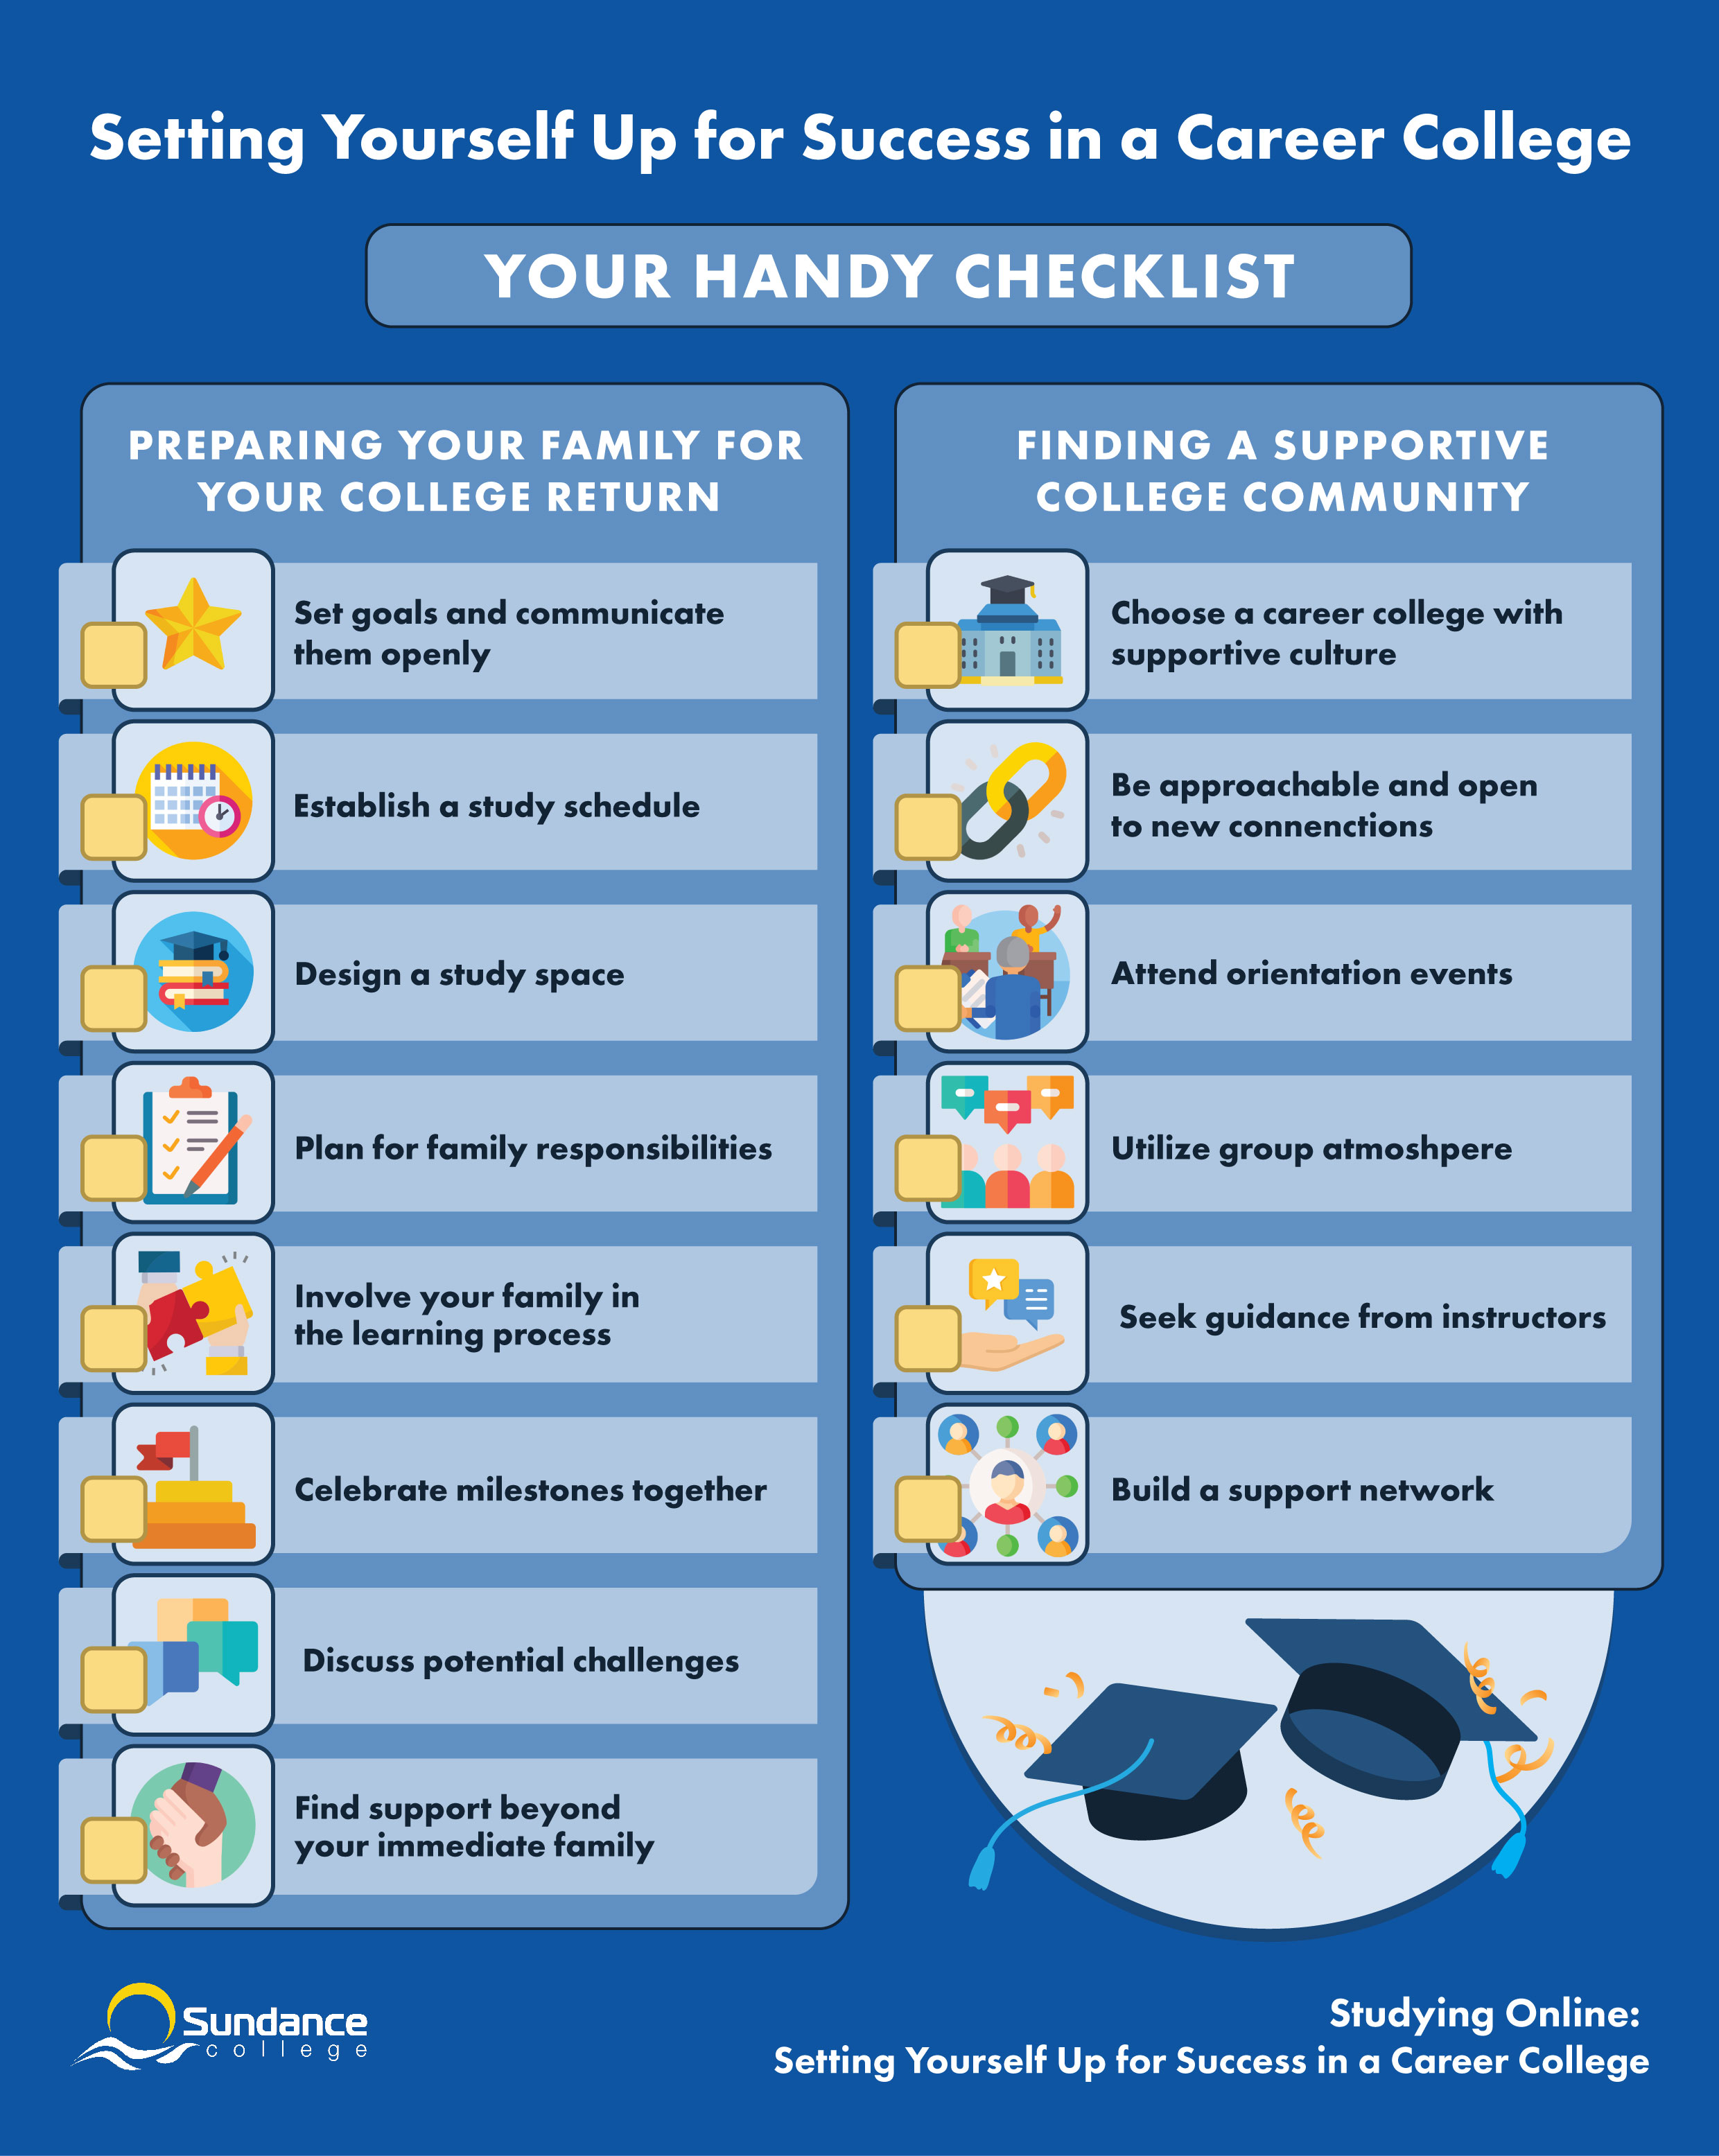 Infographic made by Sundance College that includes a handy checklist of steps to prepare your family and friends for your return to college as well as building supportive network within the college community.